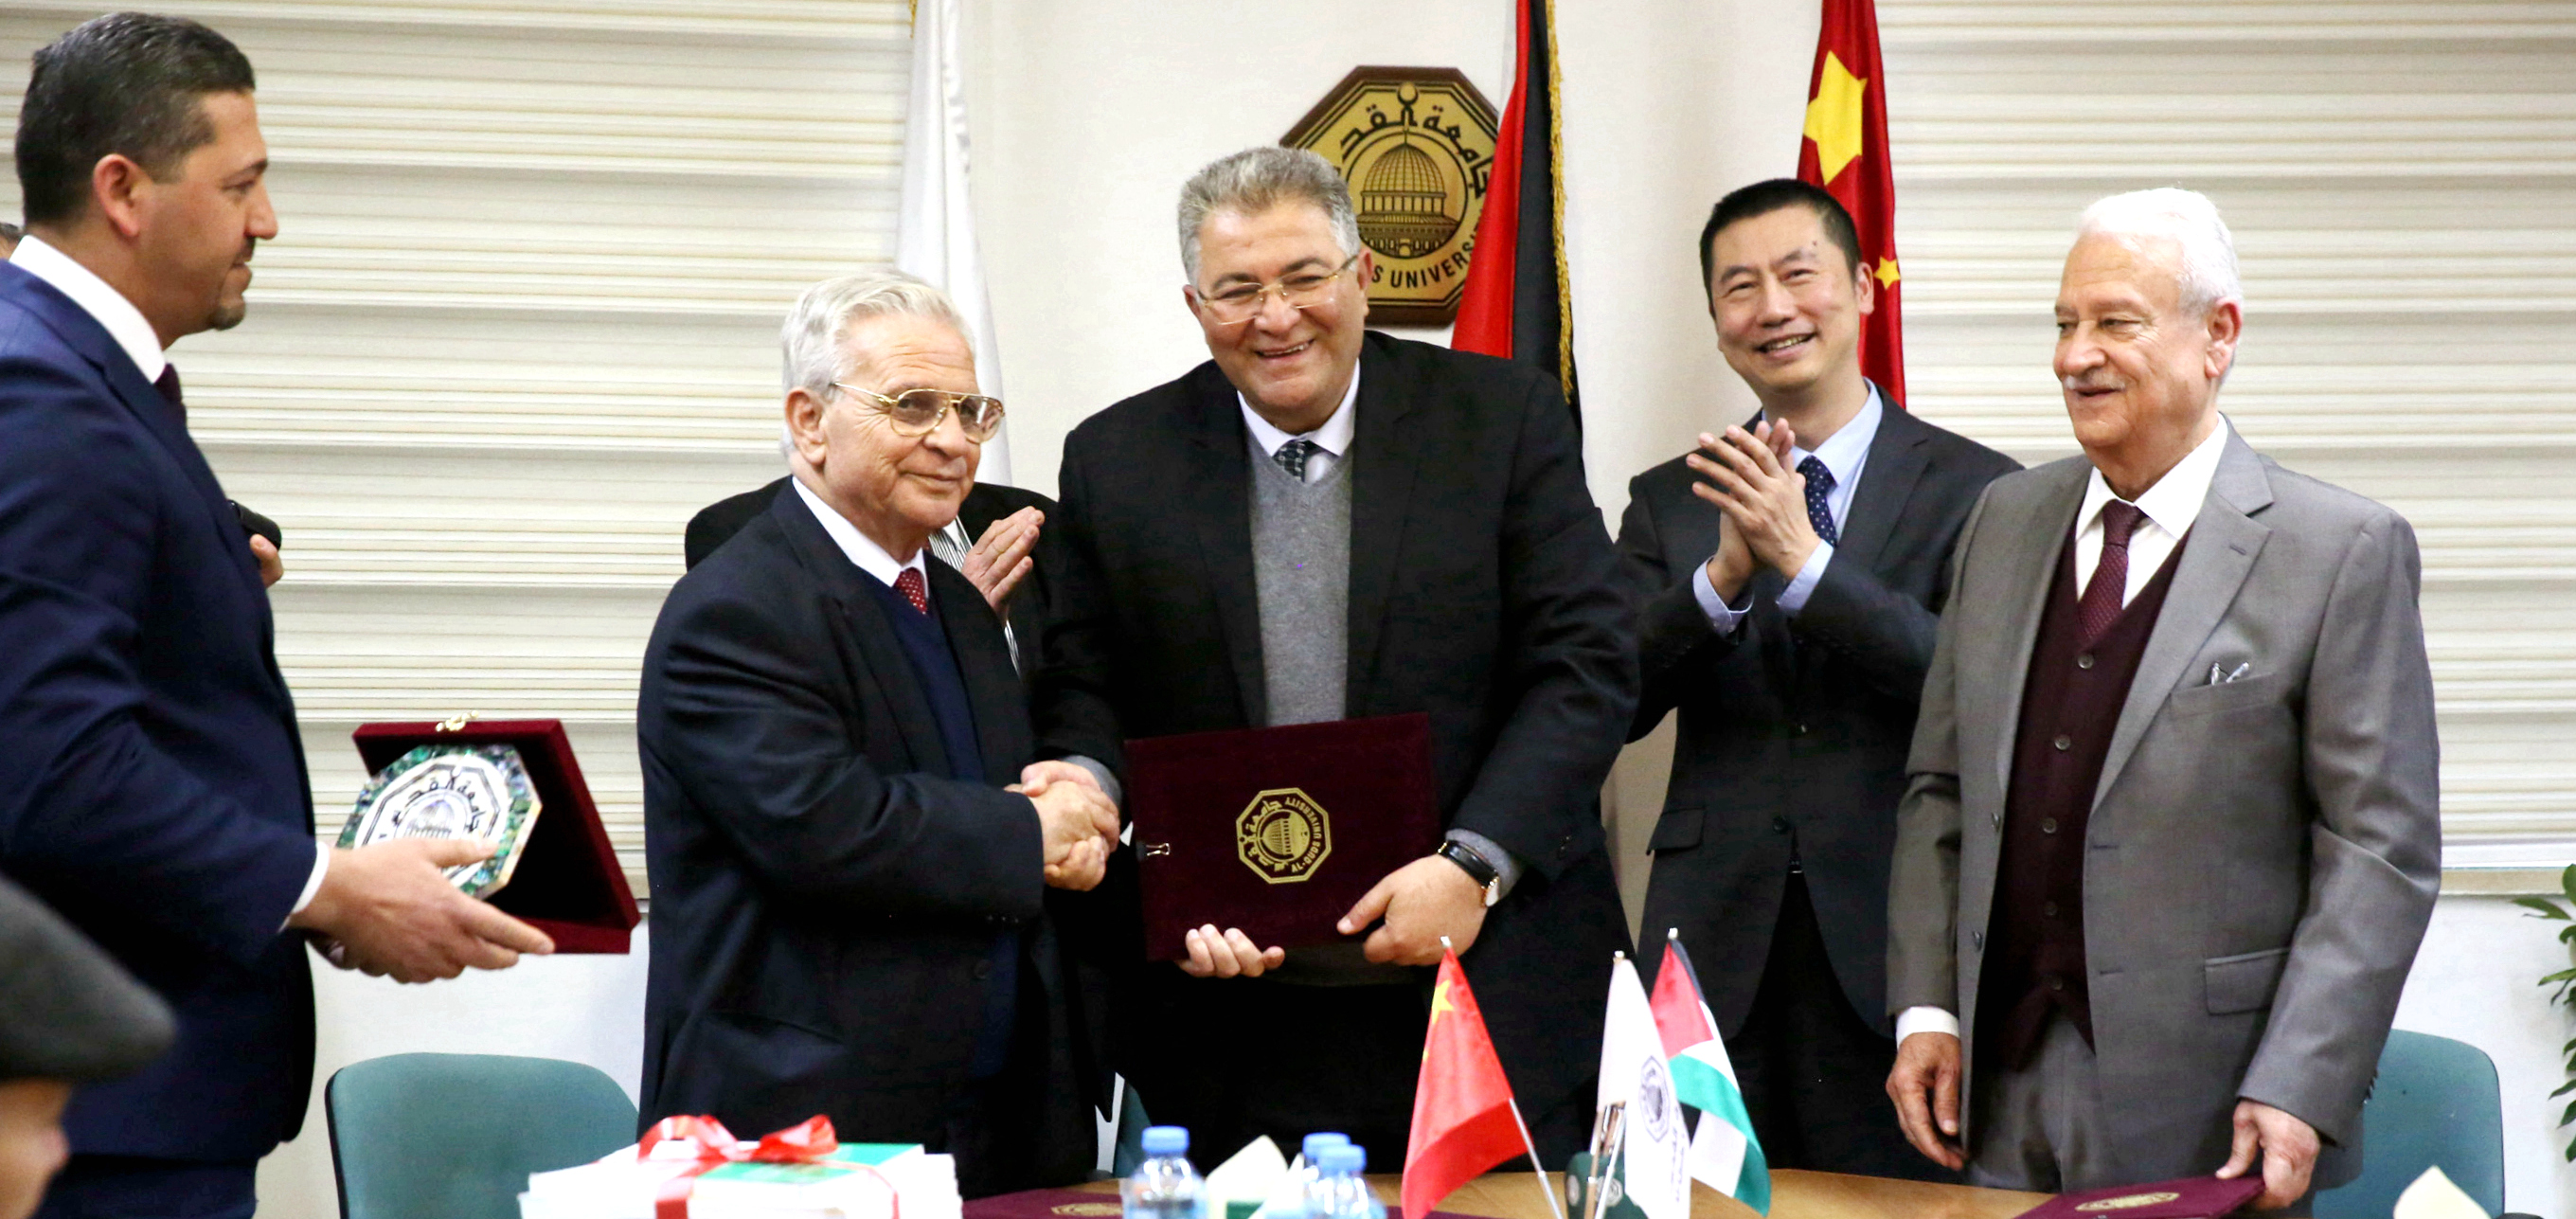 AQU signs Chinese language education agreement with Birzeit University and Al-Quds Open 